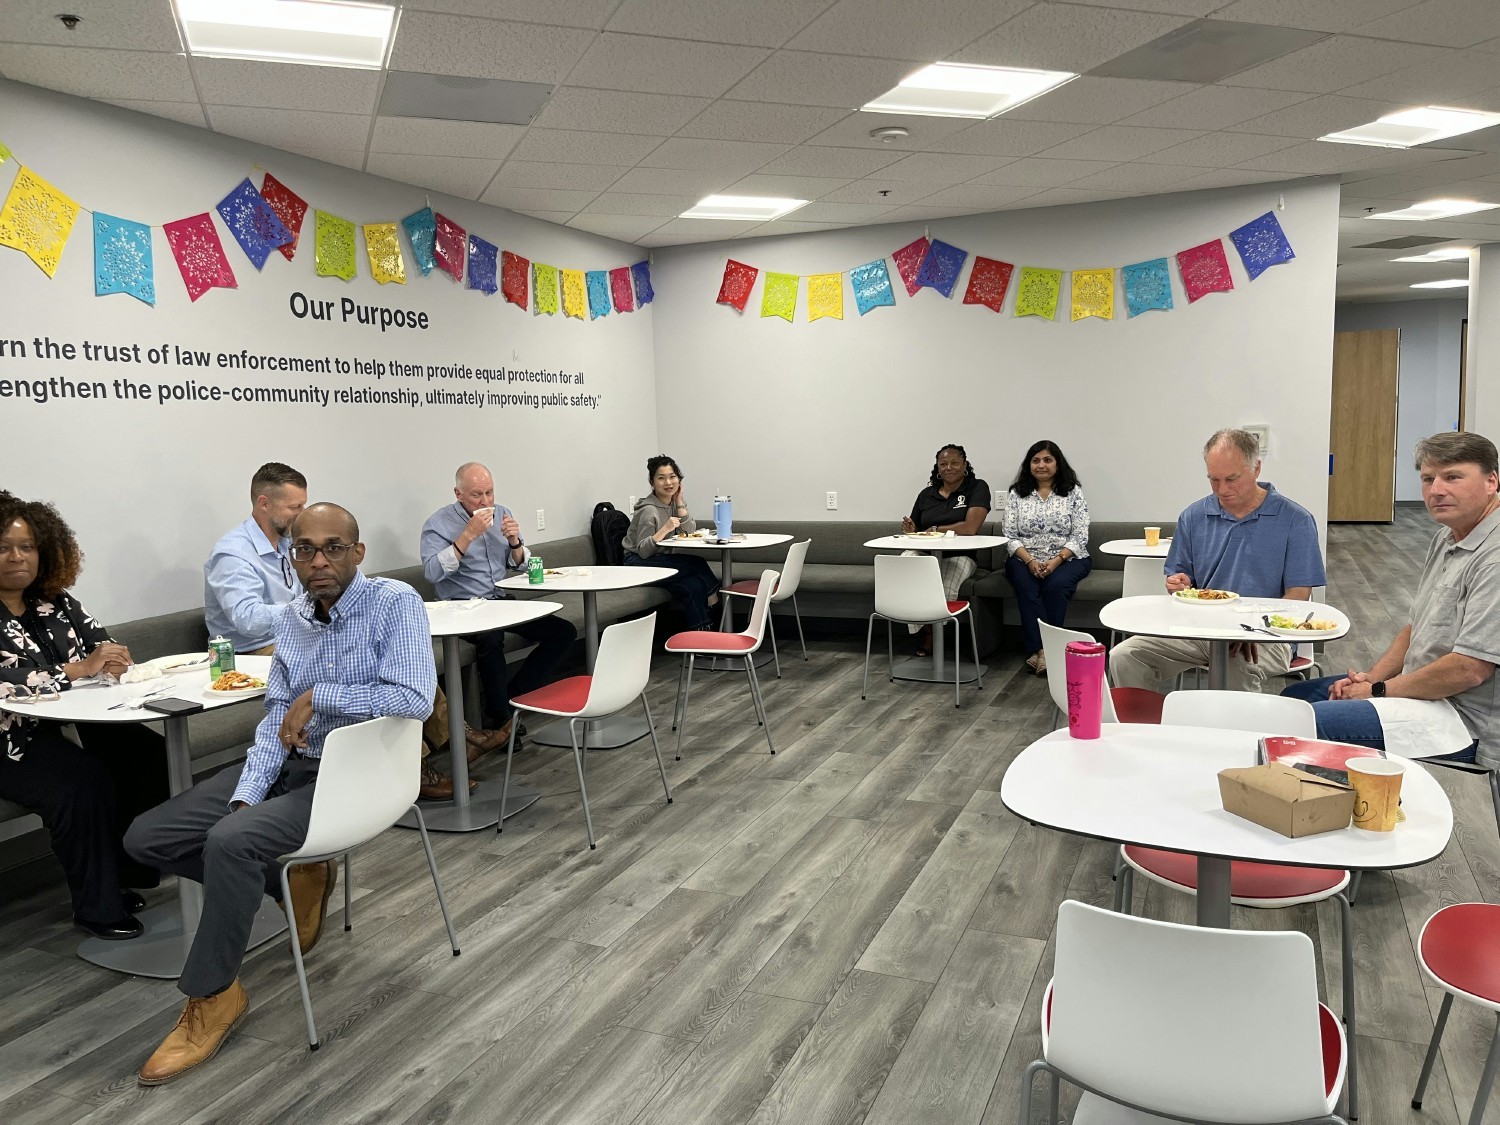 Our cafeteria is where delicious meets collaboration, as colleague connect over cuisine  conversation. #WorkPlaceCulture